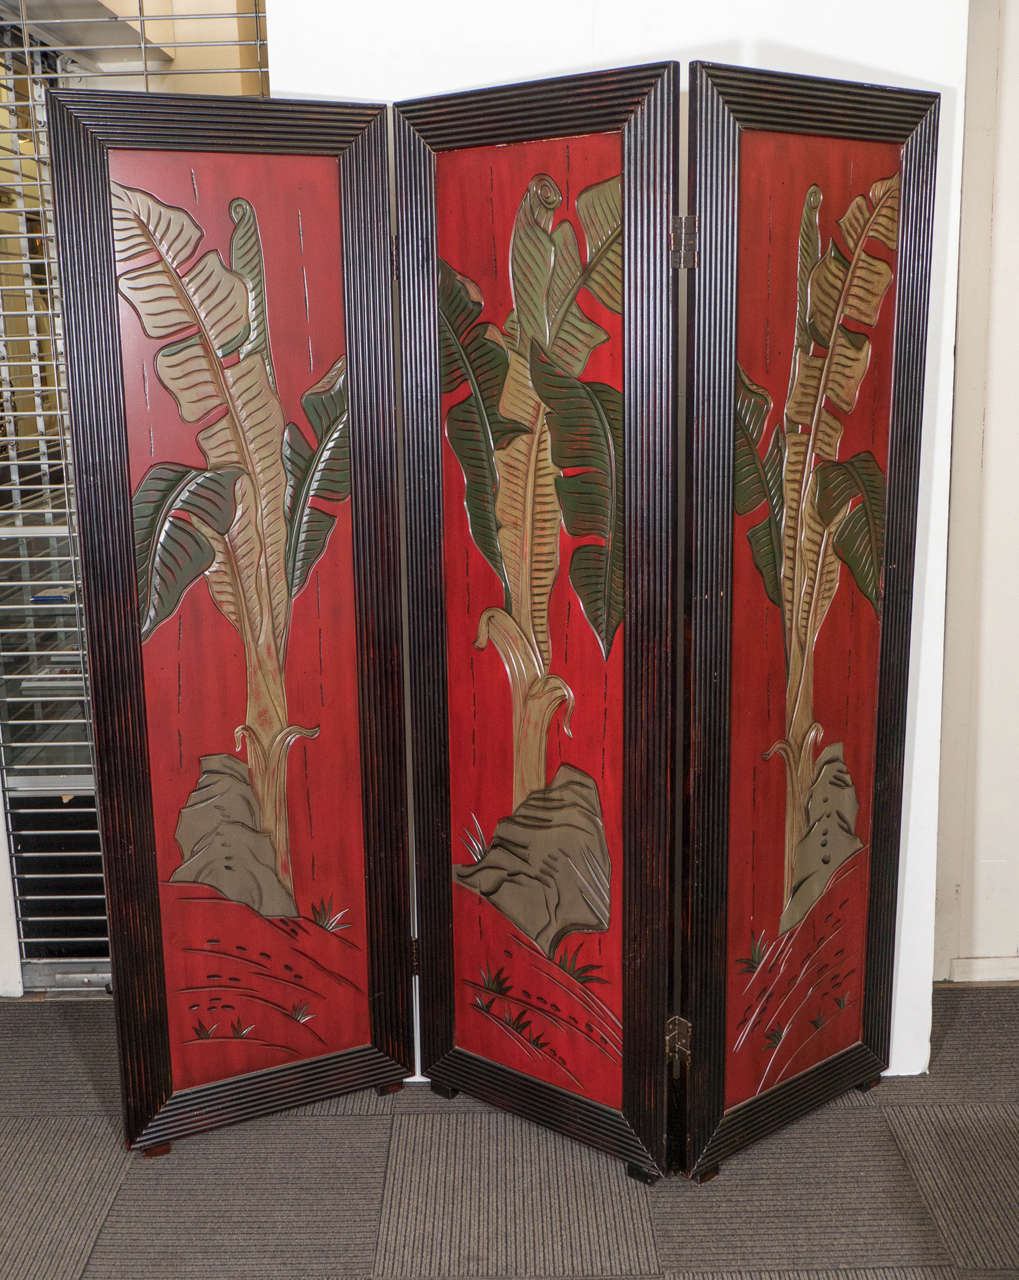 A 20th century Asian three-panel screen or room divider in red with palm leaf decoration. Good vintage condition with age appropriate wear.